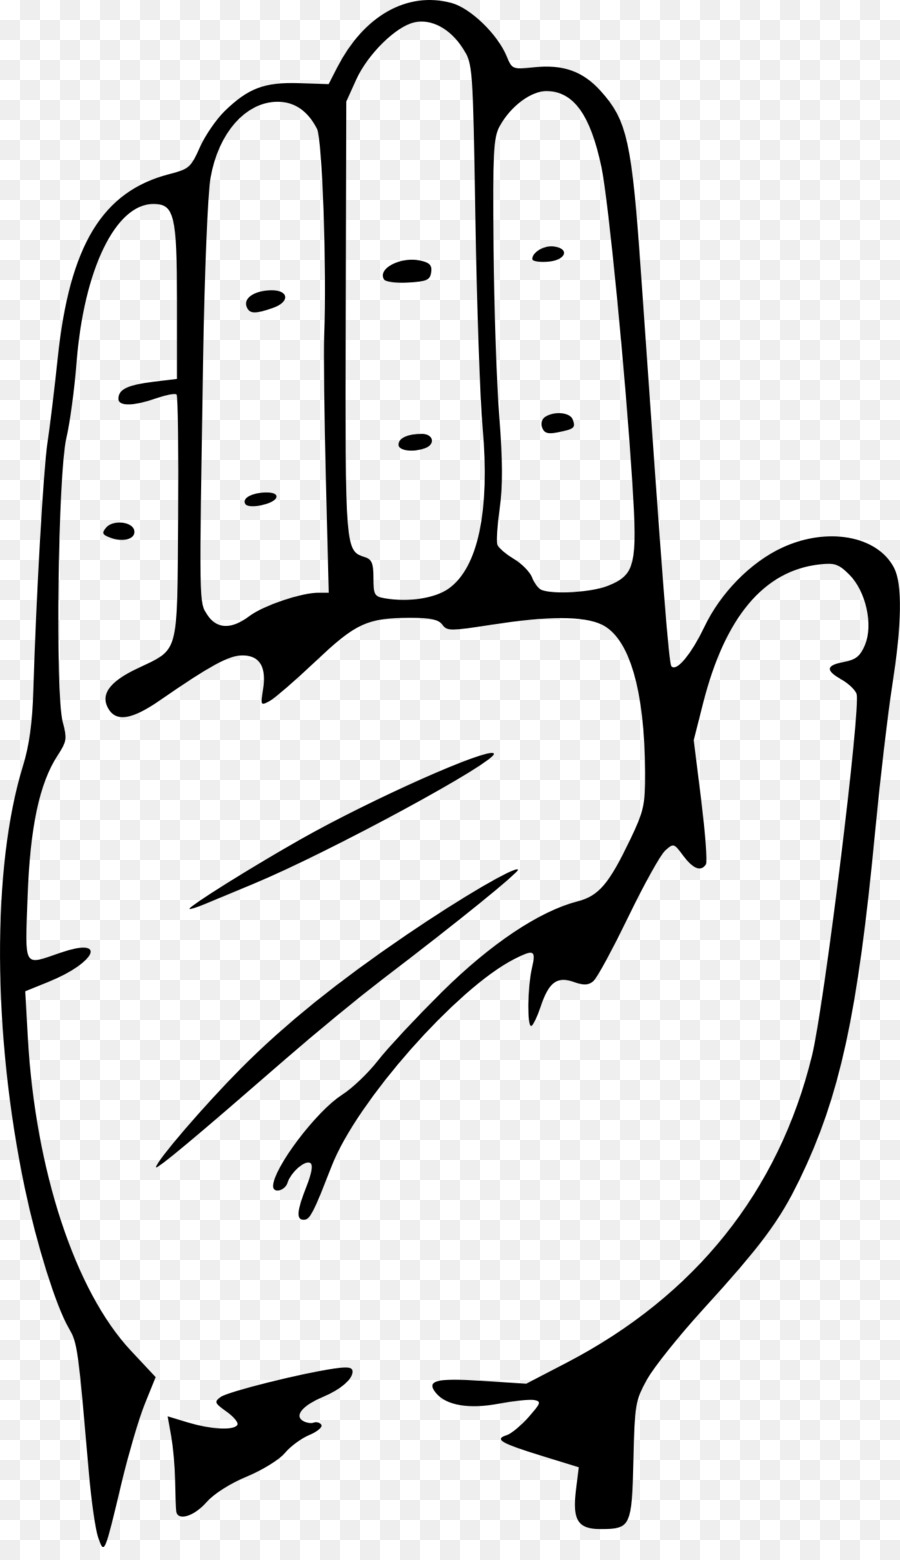 Line art,Finger,Hand,Coloring book,Clip art,Black-and-white,Thumb,Gesture